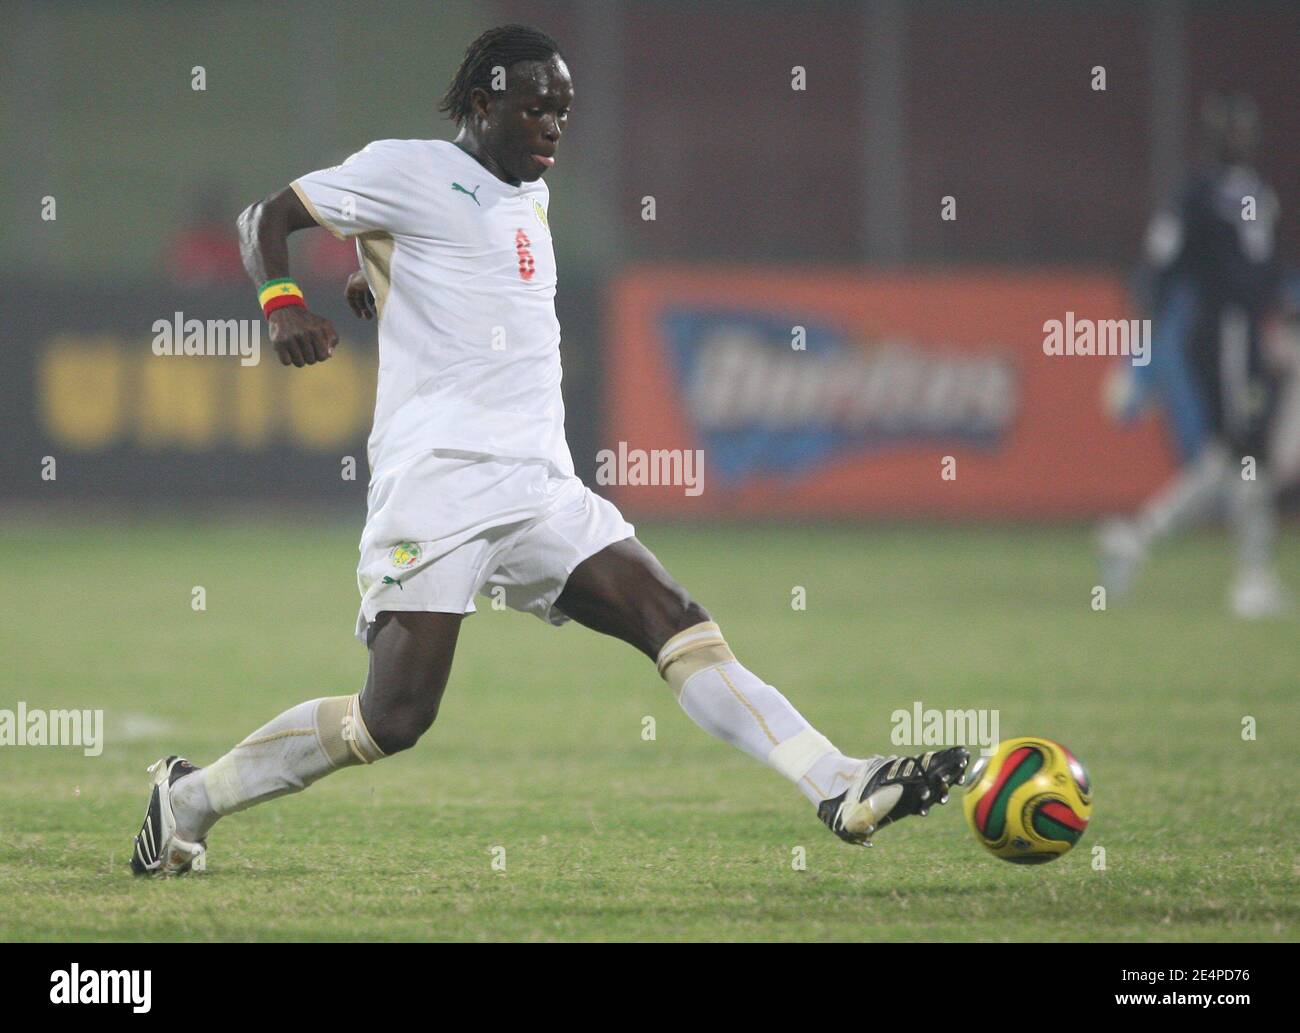 Senegal's Ibrahima Faye during the African Cup of Nations soccer match, Senegal vs South Africa in Kumasi, Ghana on January 31, 2008. The match ended in a 1-1 draw. Senegal failed to qualify for the next round of the competition. Photo by Steeve McMay/Cameleon/ABACAPRESS.COM Stock Photo